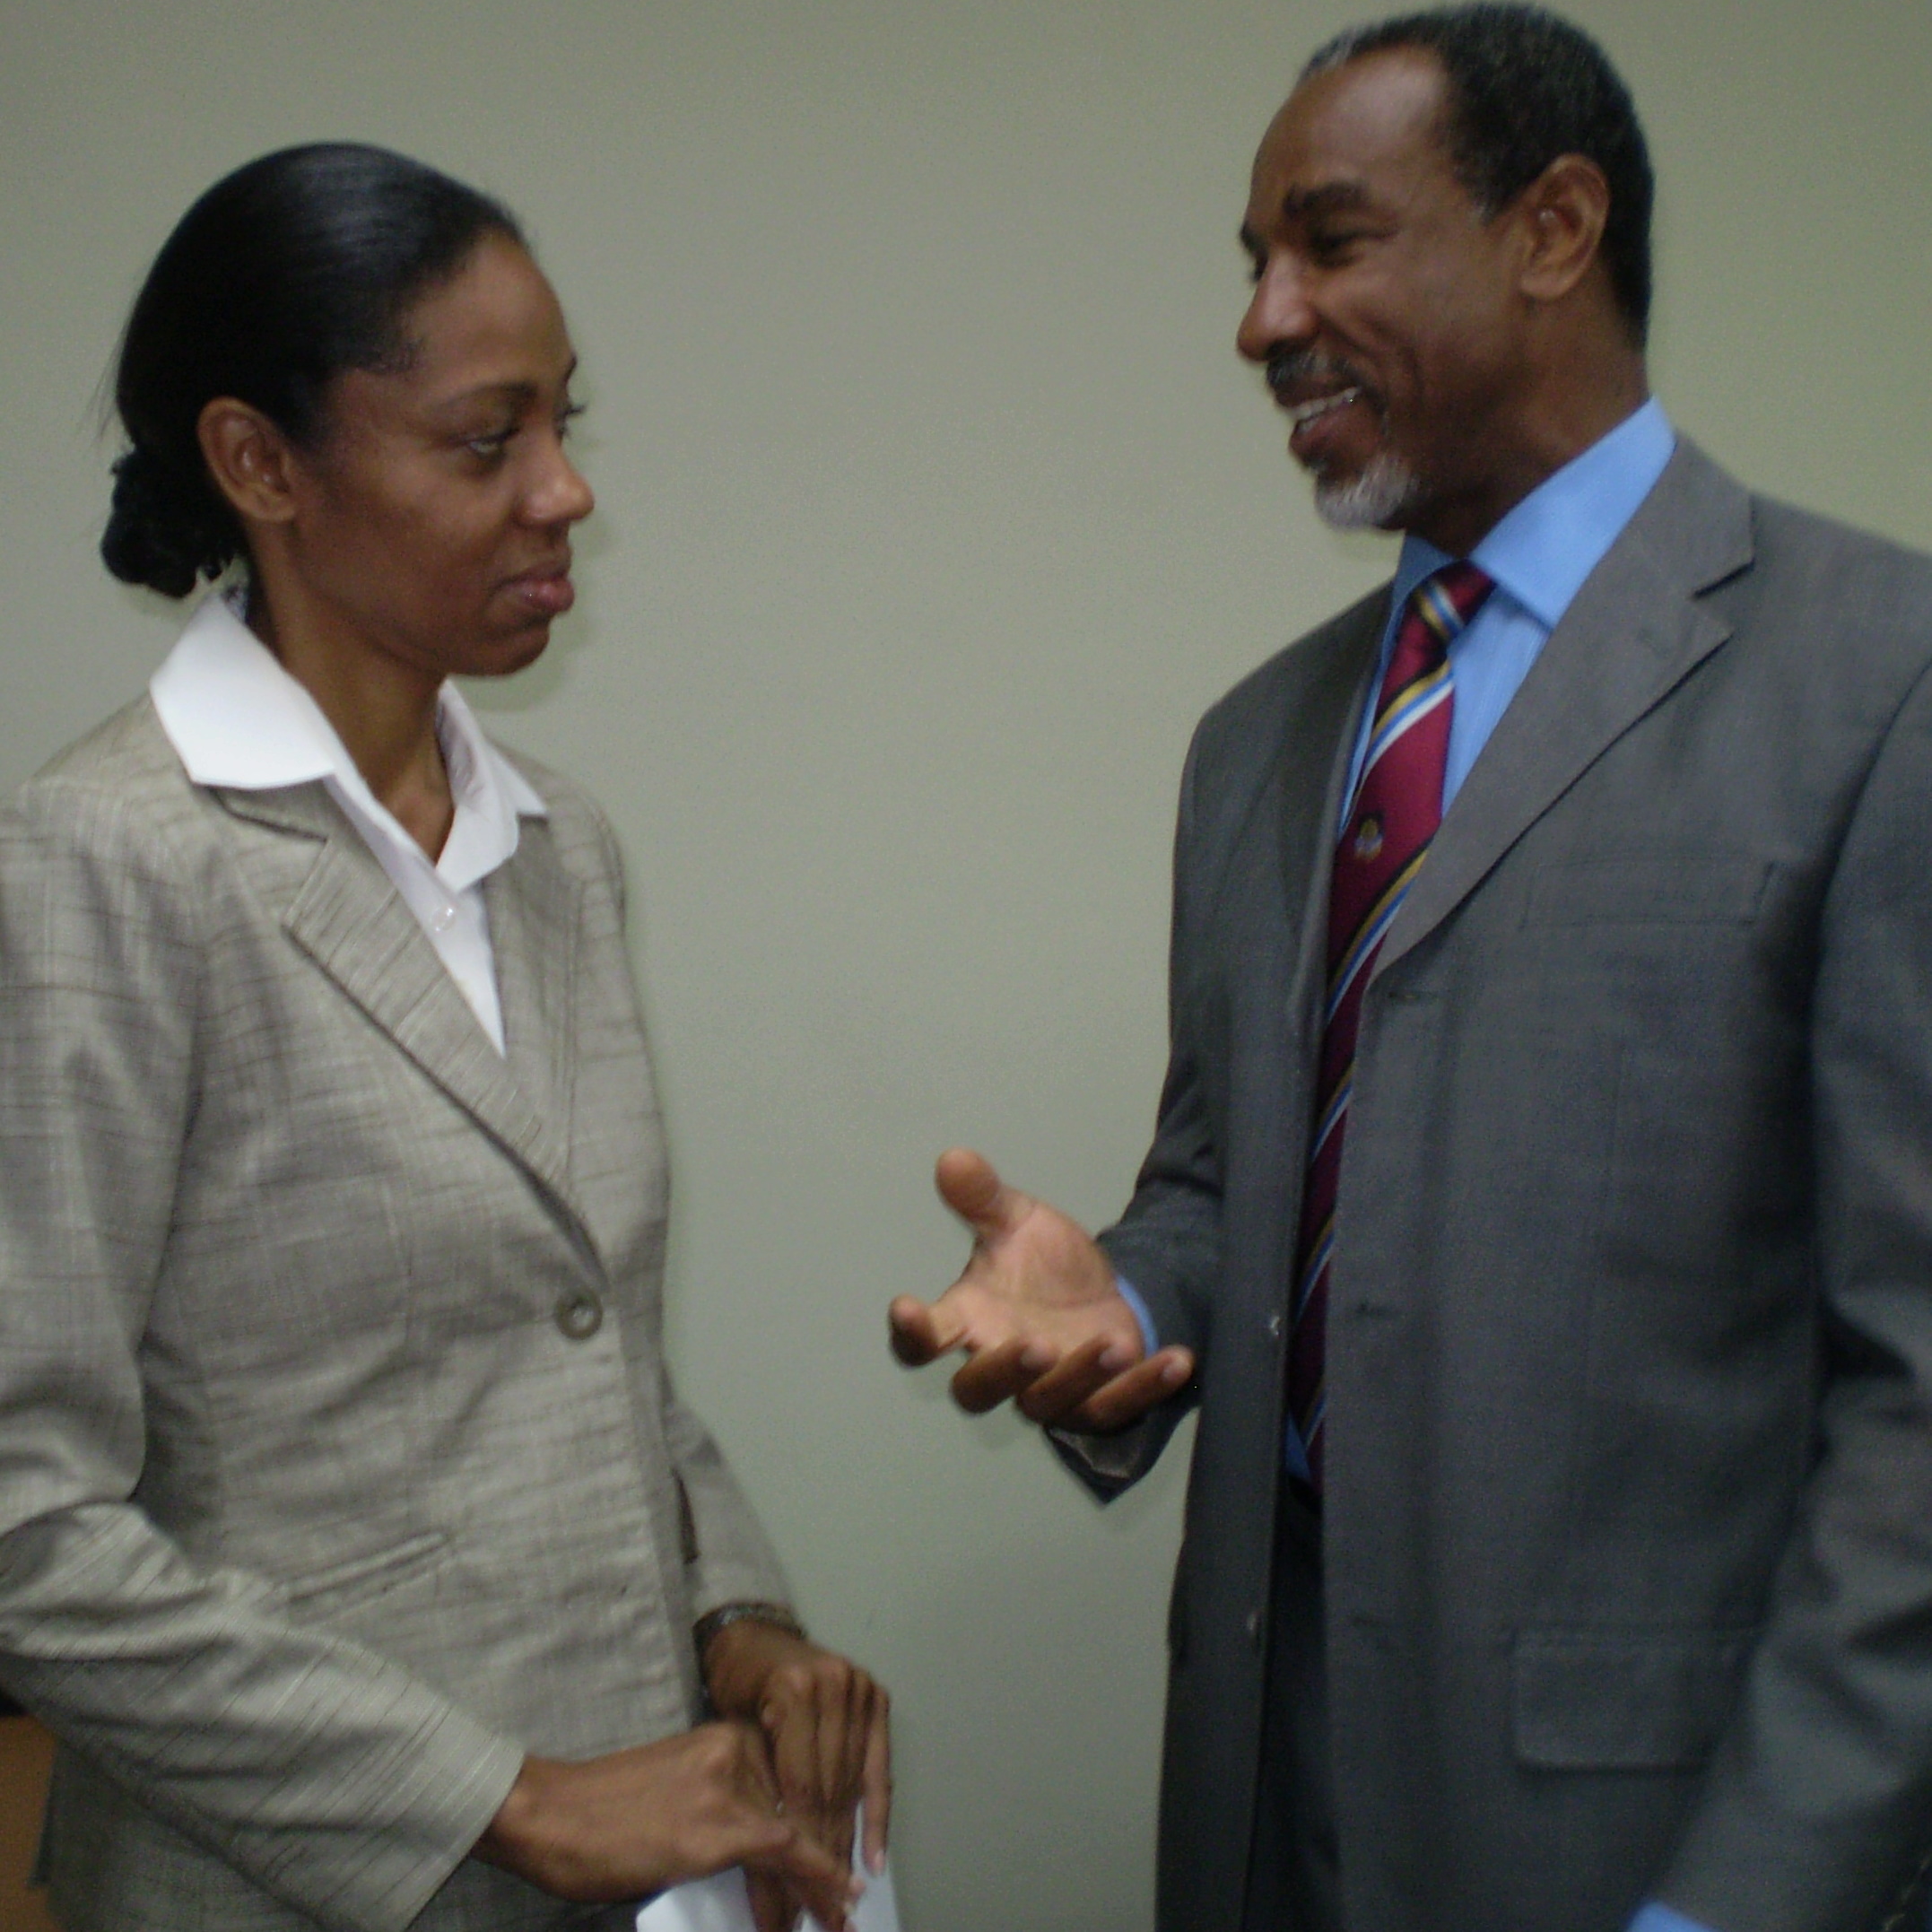 Treasurer Sanida McKenzie (left), and Silton Browne, president of the Seventh-Day Adventist North Caribbean Conference.